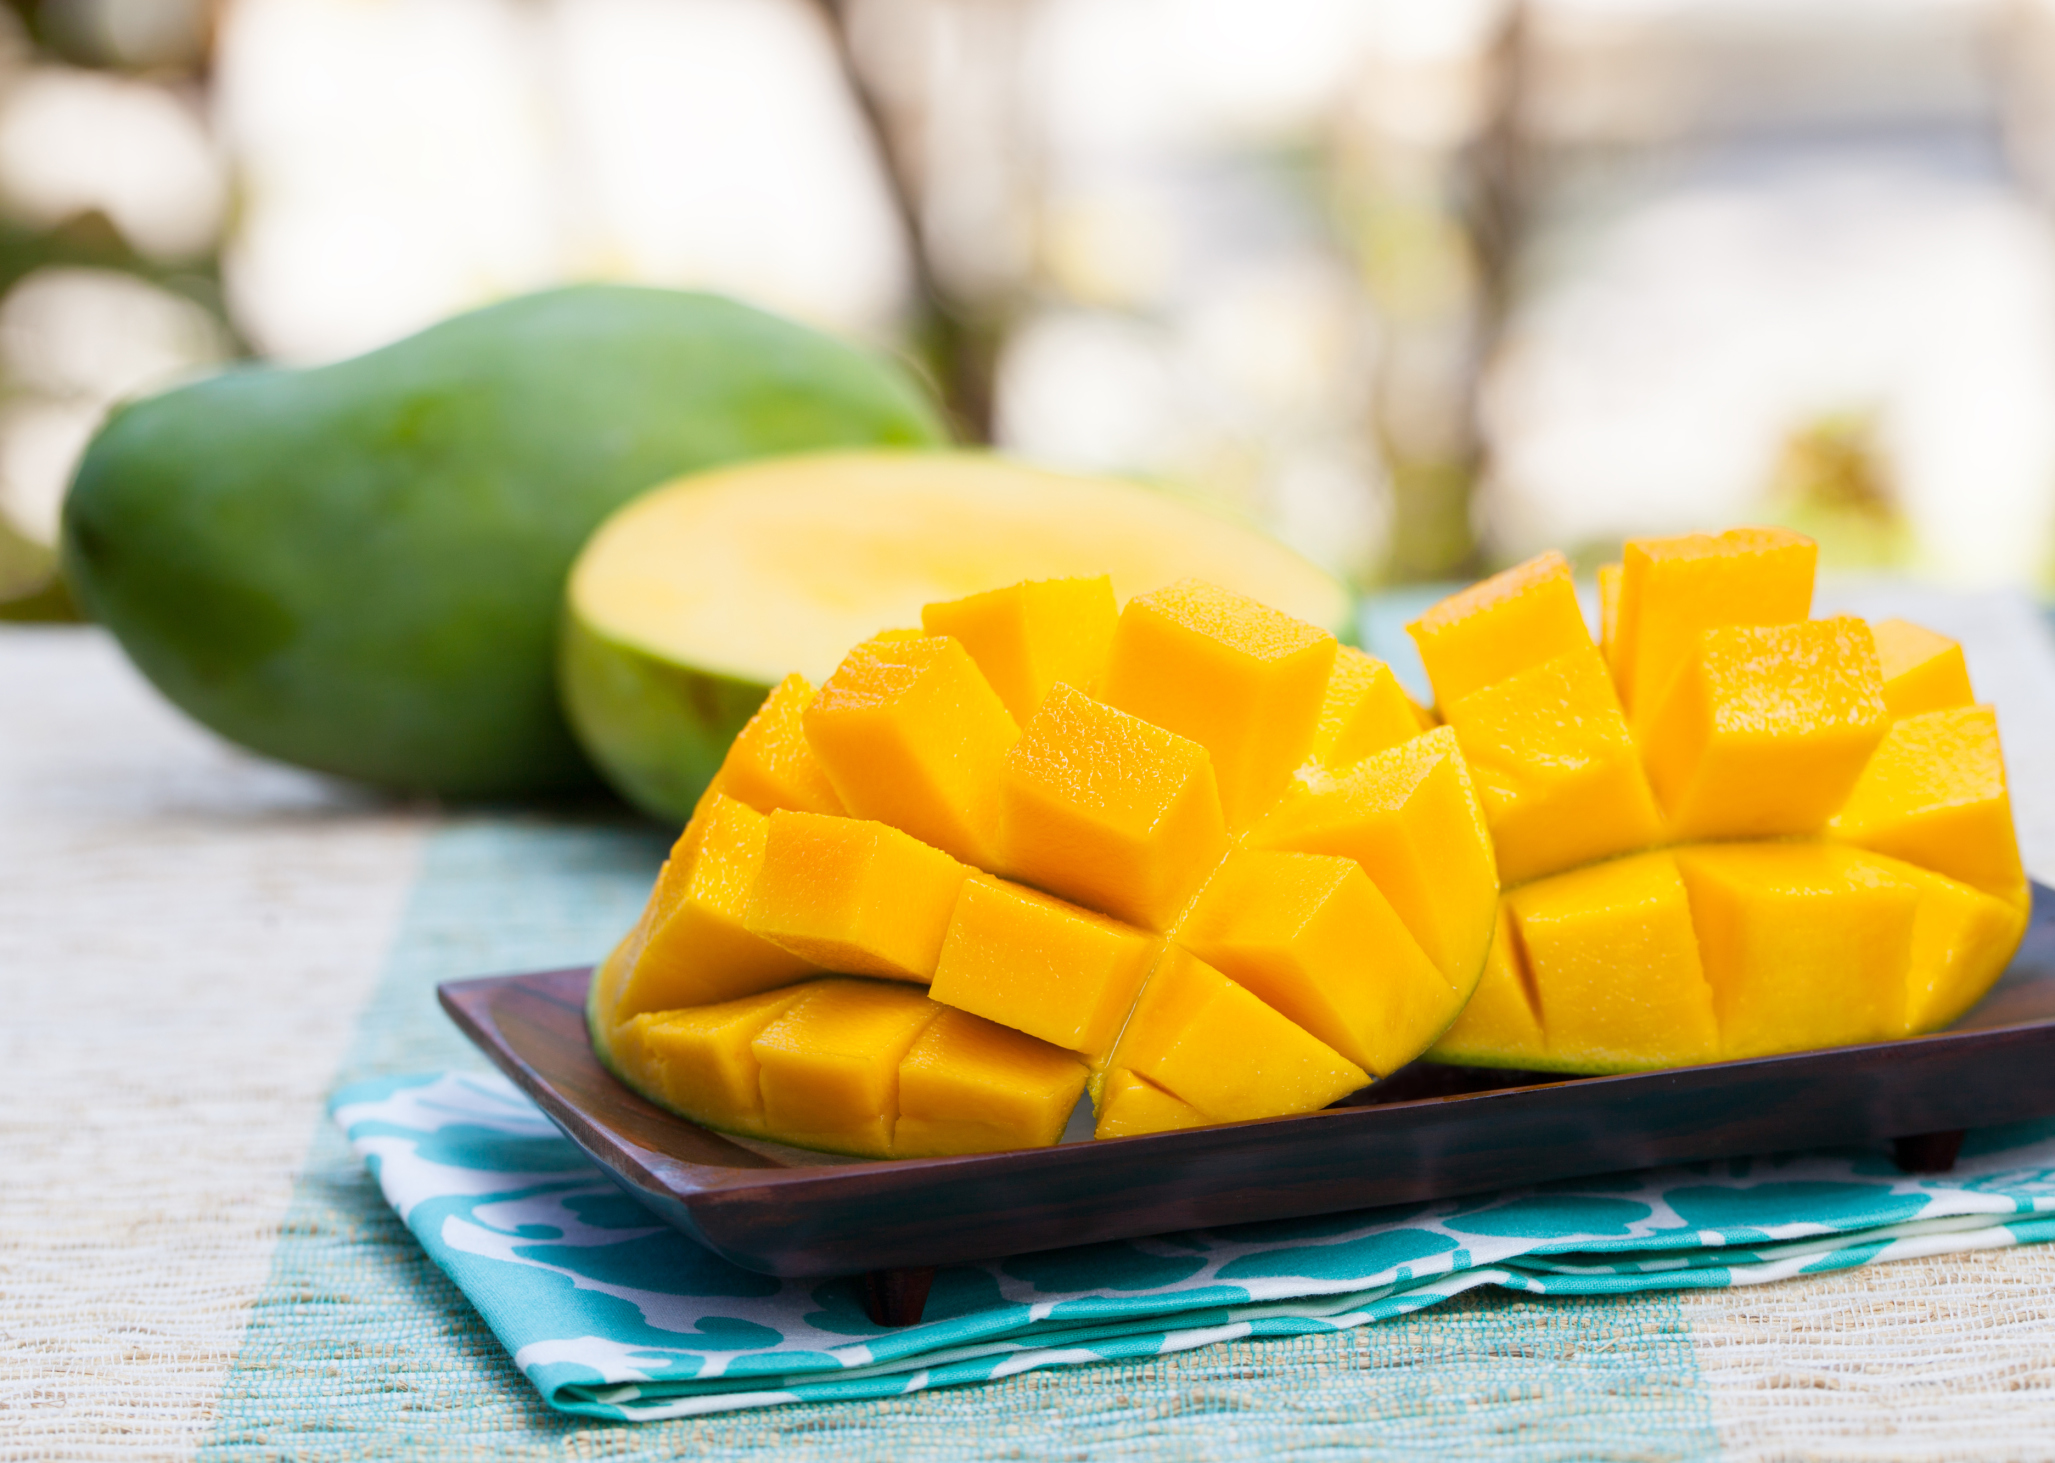 7 Popular Indonesian Mangoes You #MustTry - Indoindians